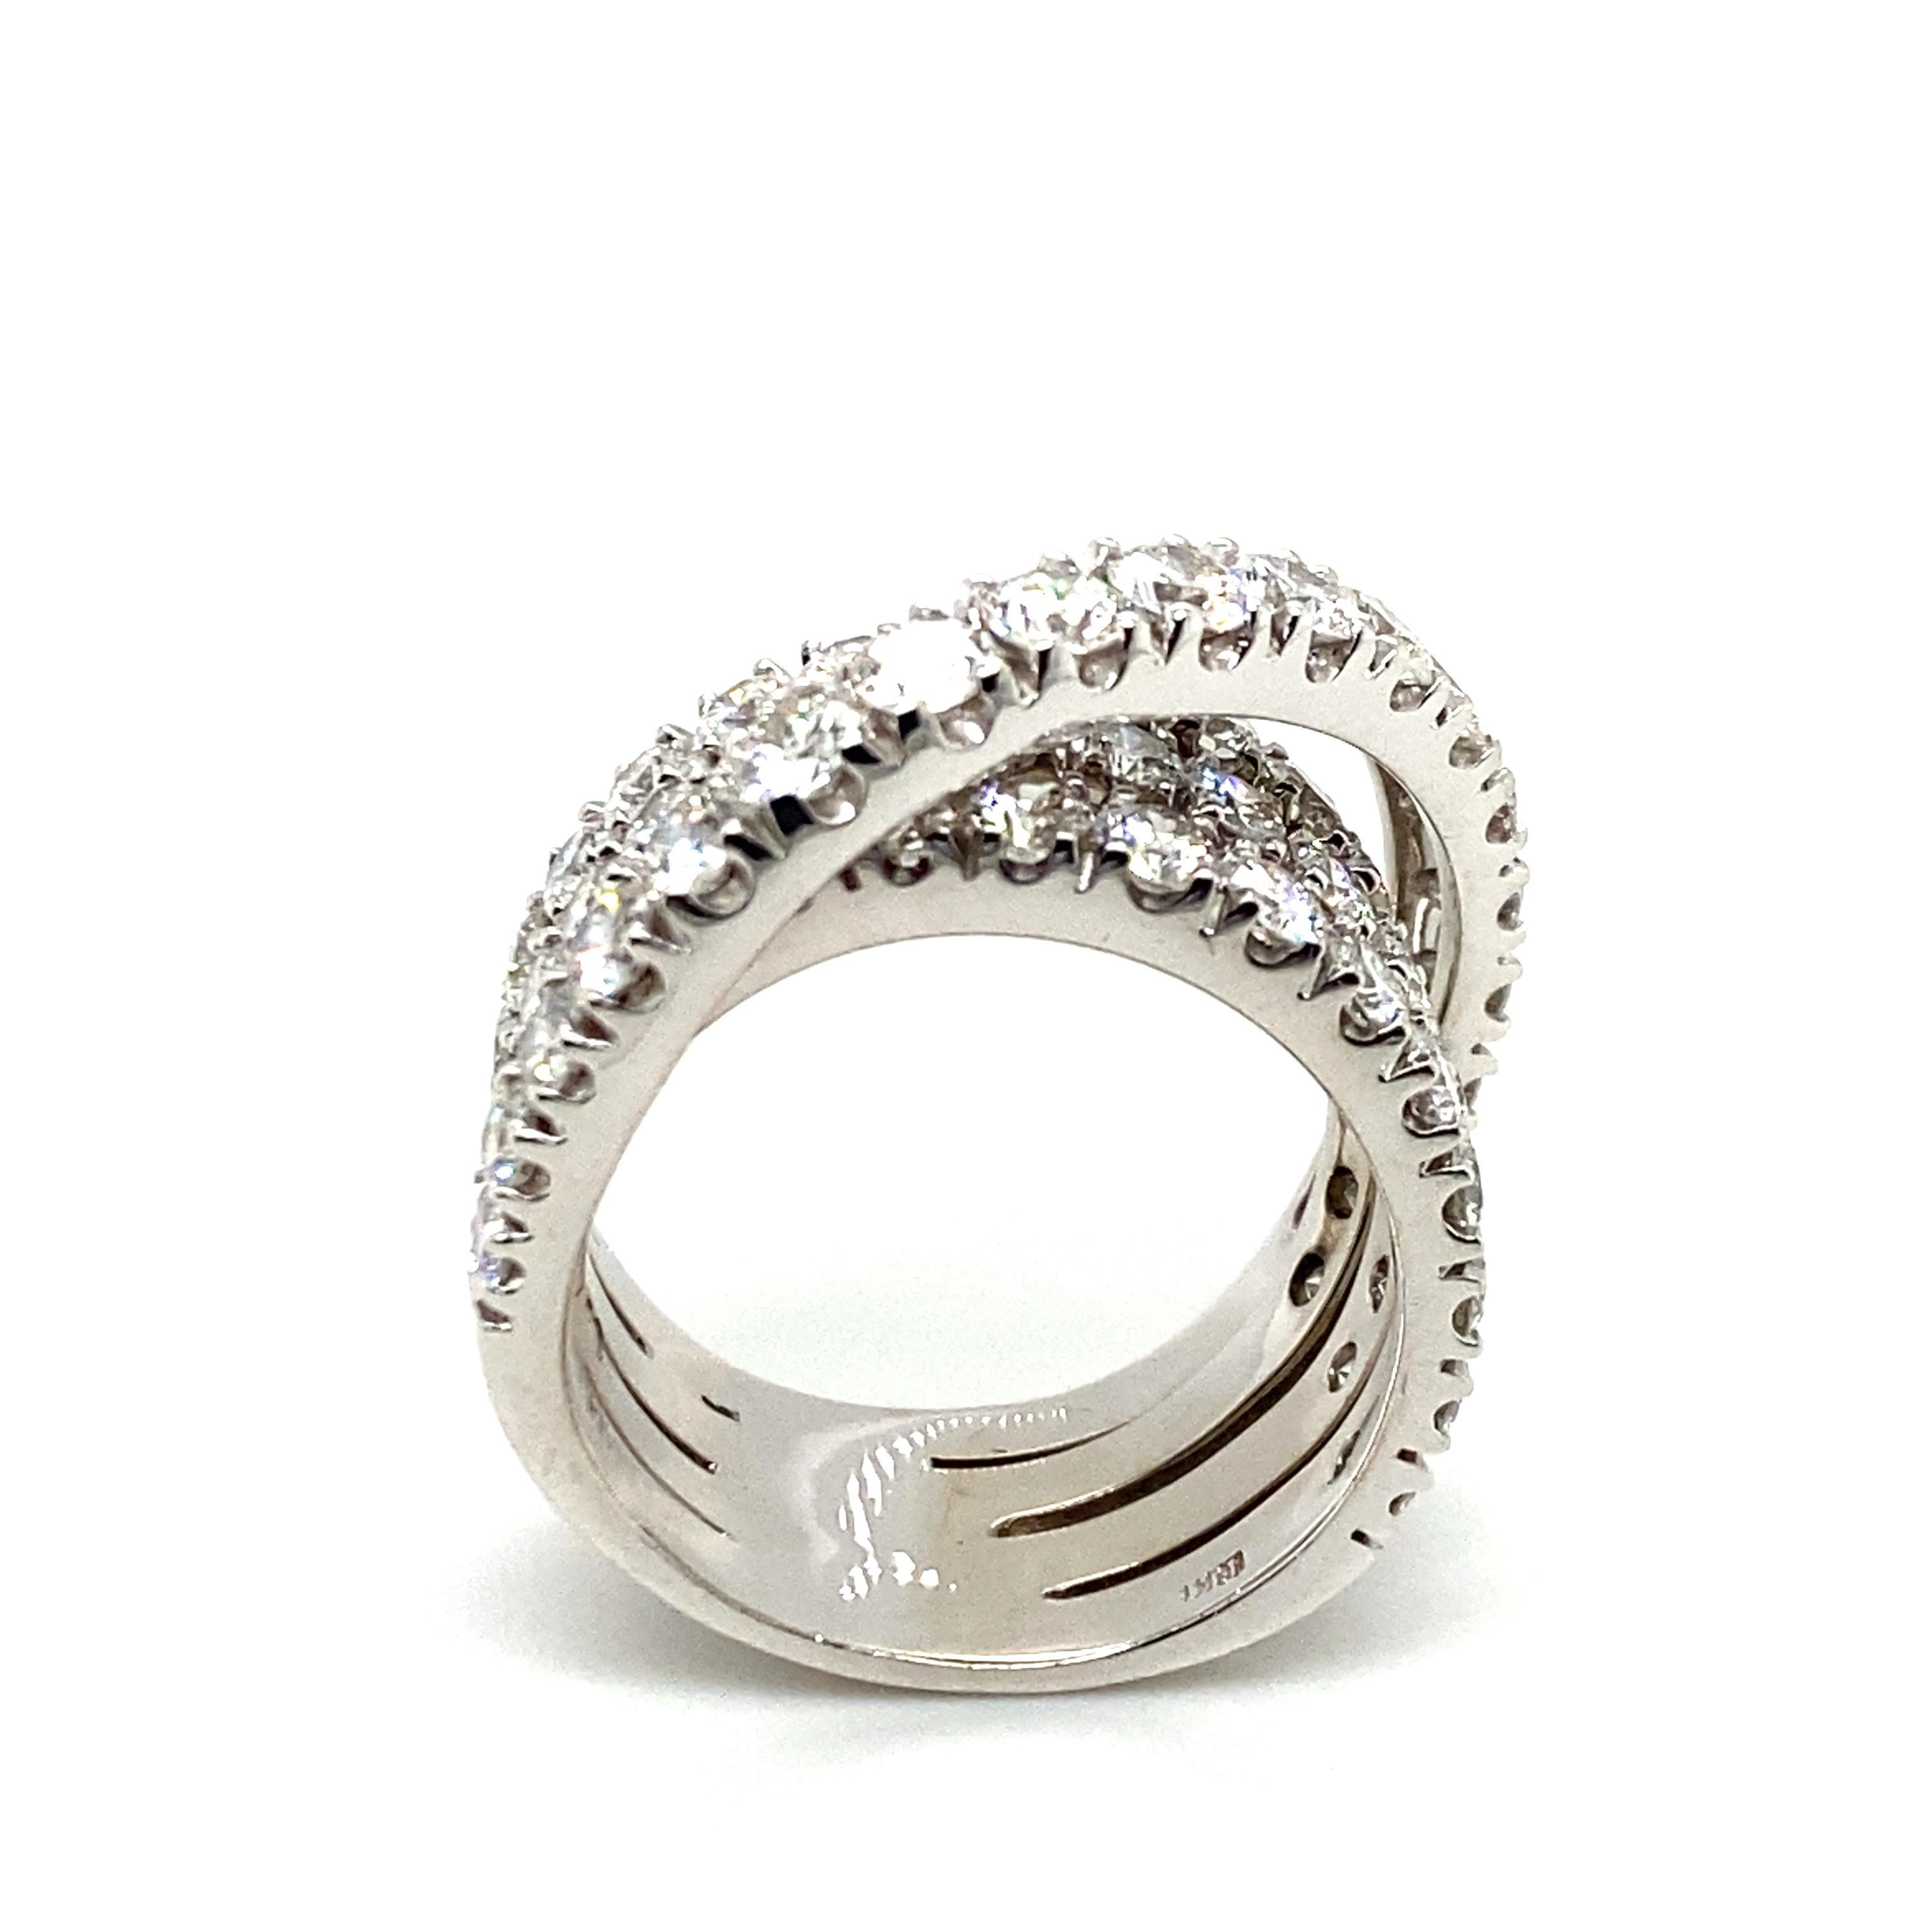 Super Sparkling Diamond Ring by Crivelli in 18 Karat White Gold For Sale 3